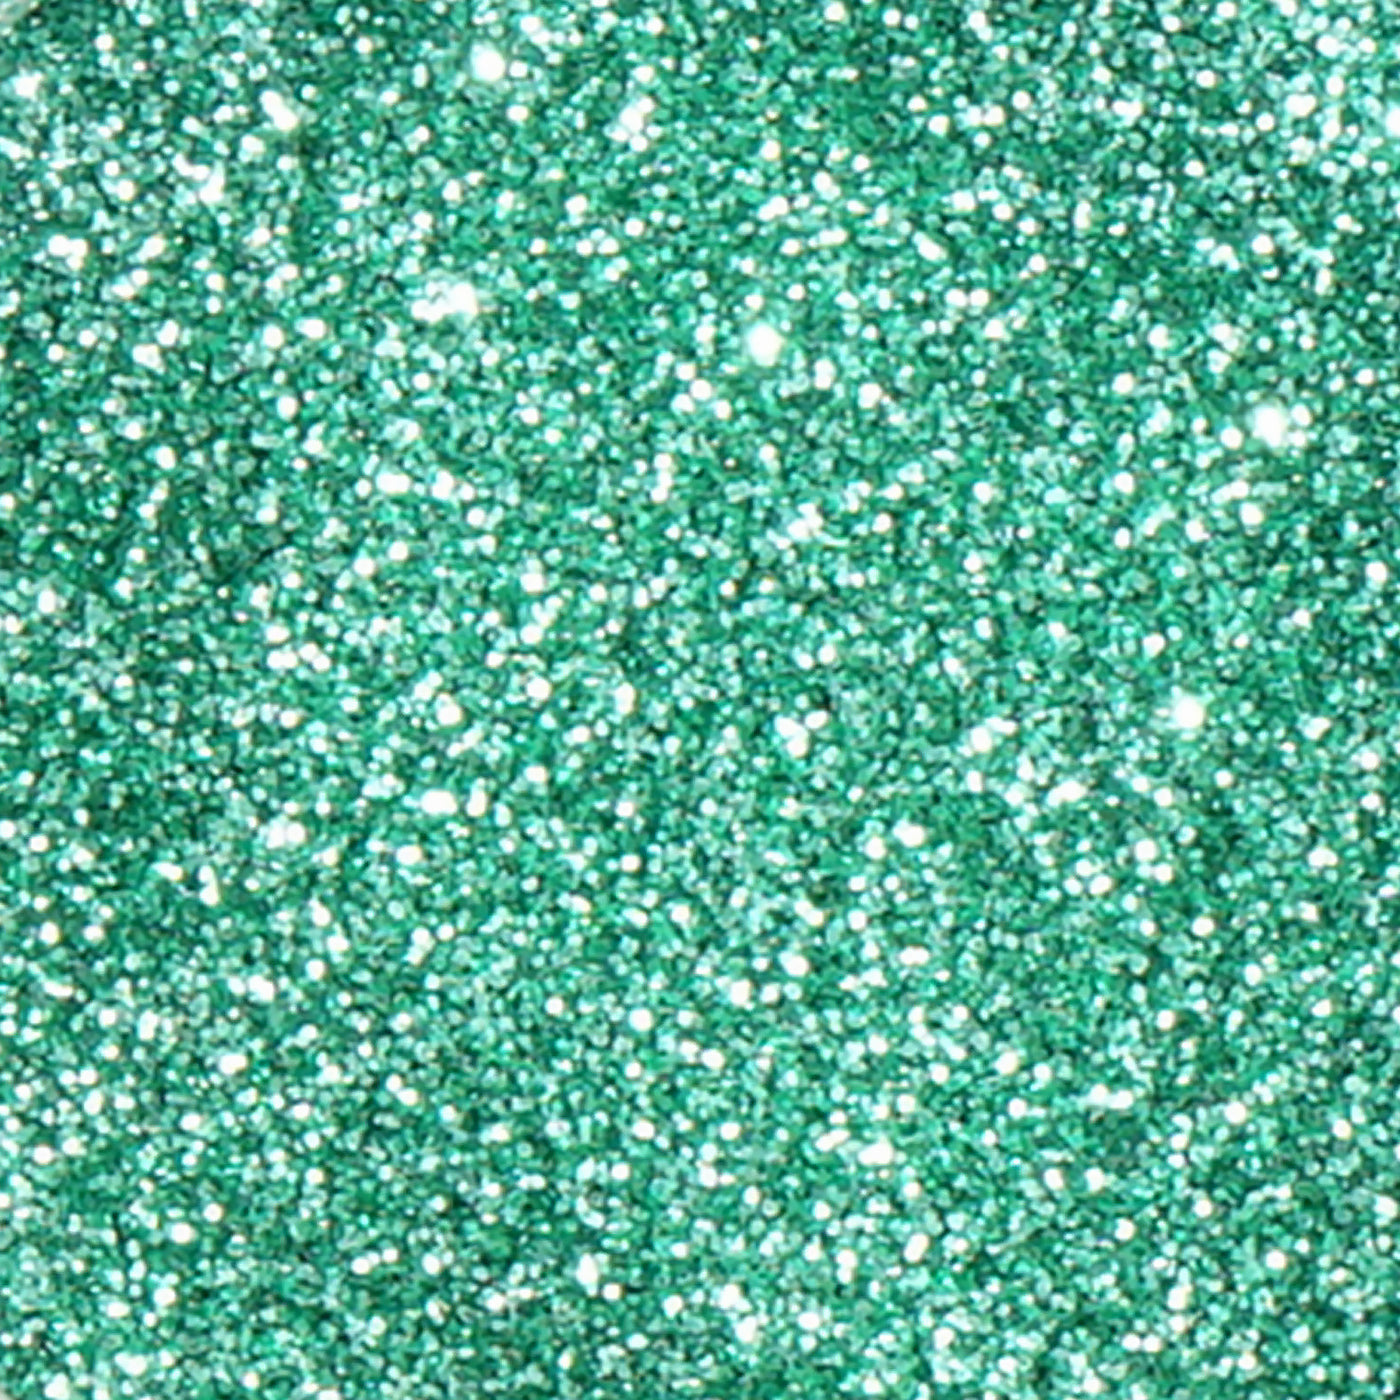 Spring Green Biodegradable Cosmetic Glitter